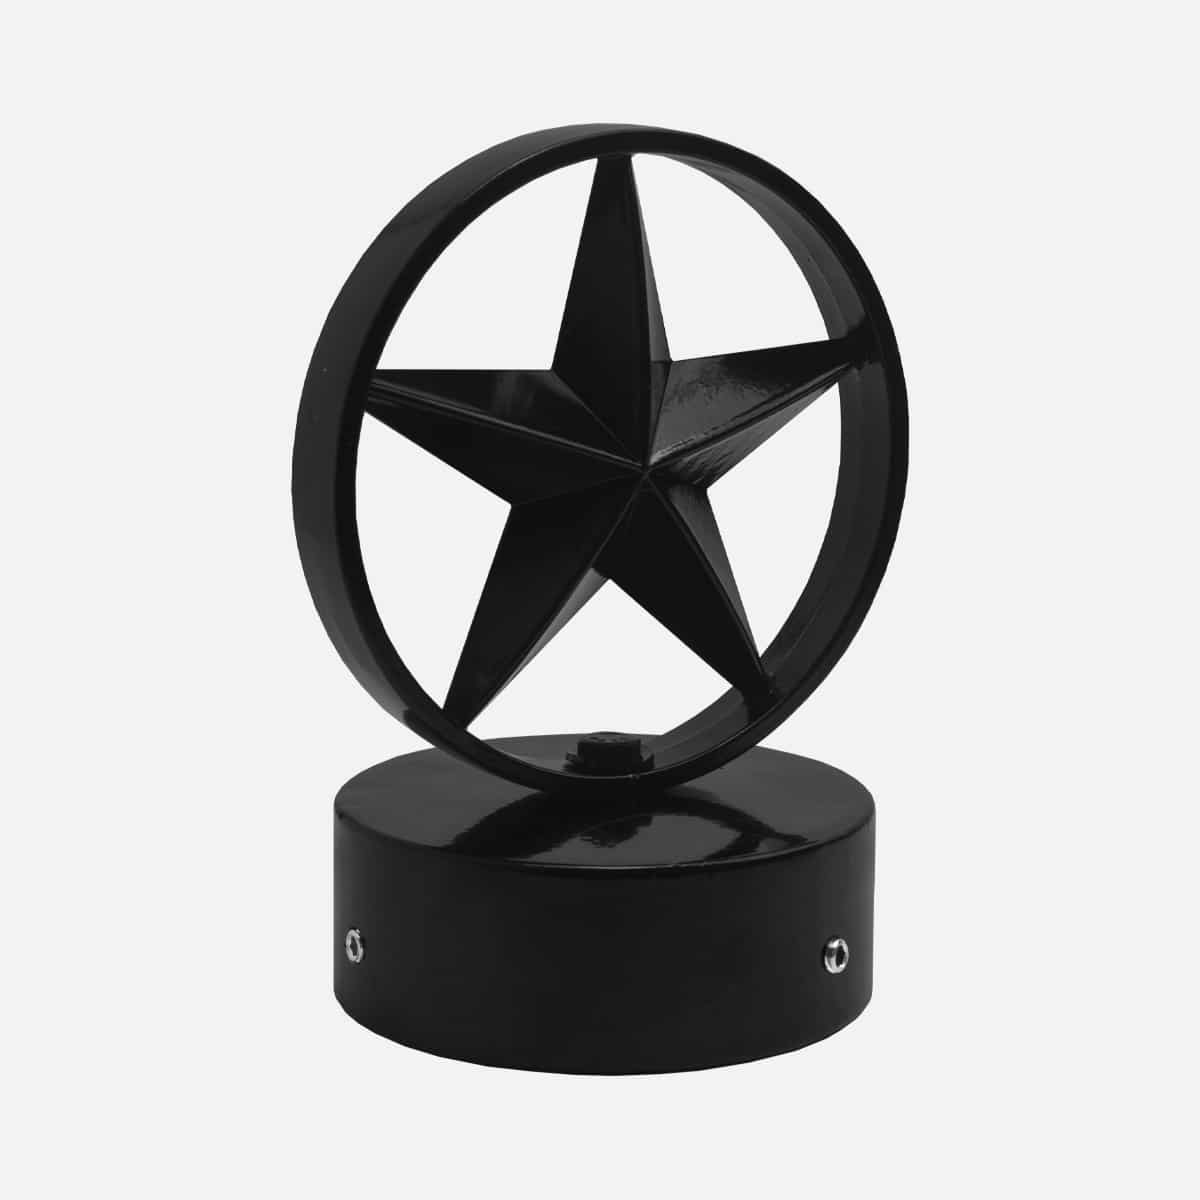 Decorative circle and star cast aluminum finial for sign and light poles. Brandon Industries model FIN-CS4 fits 4 inch round poles.